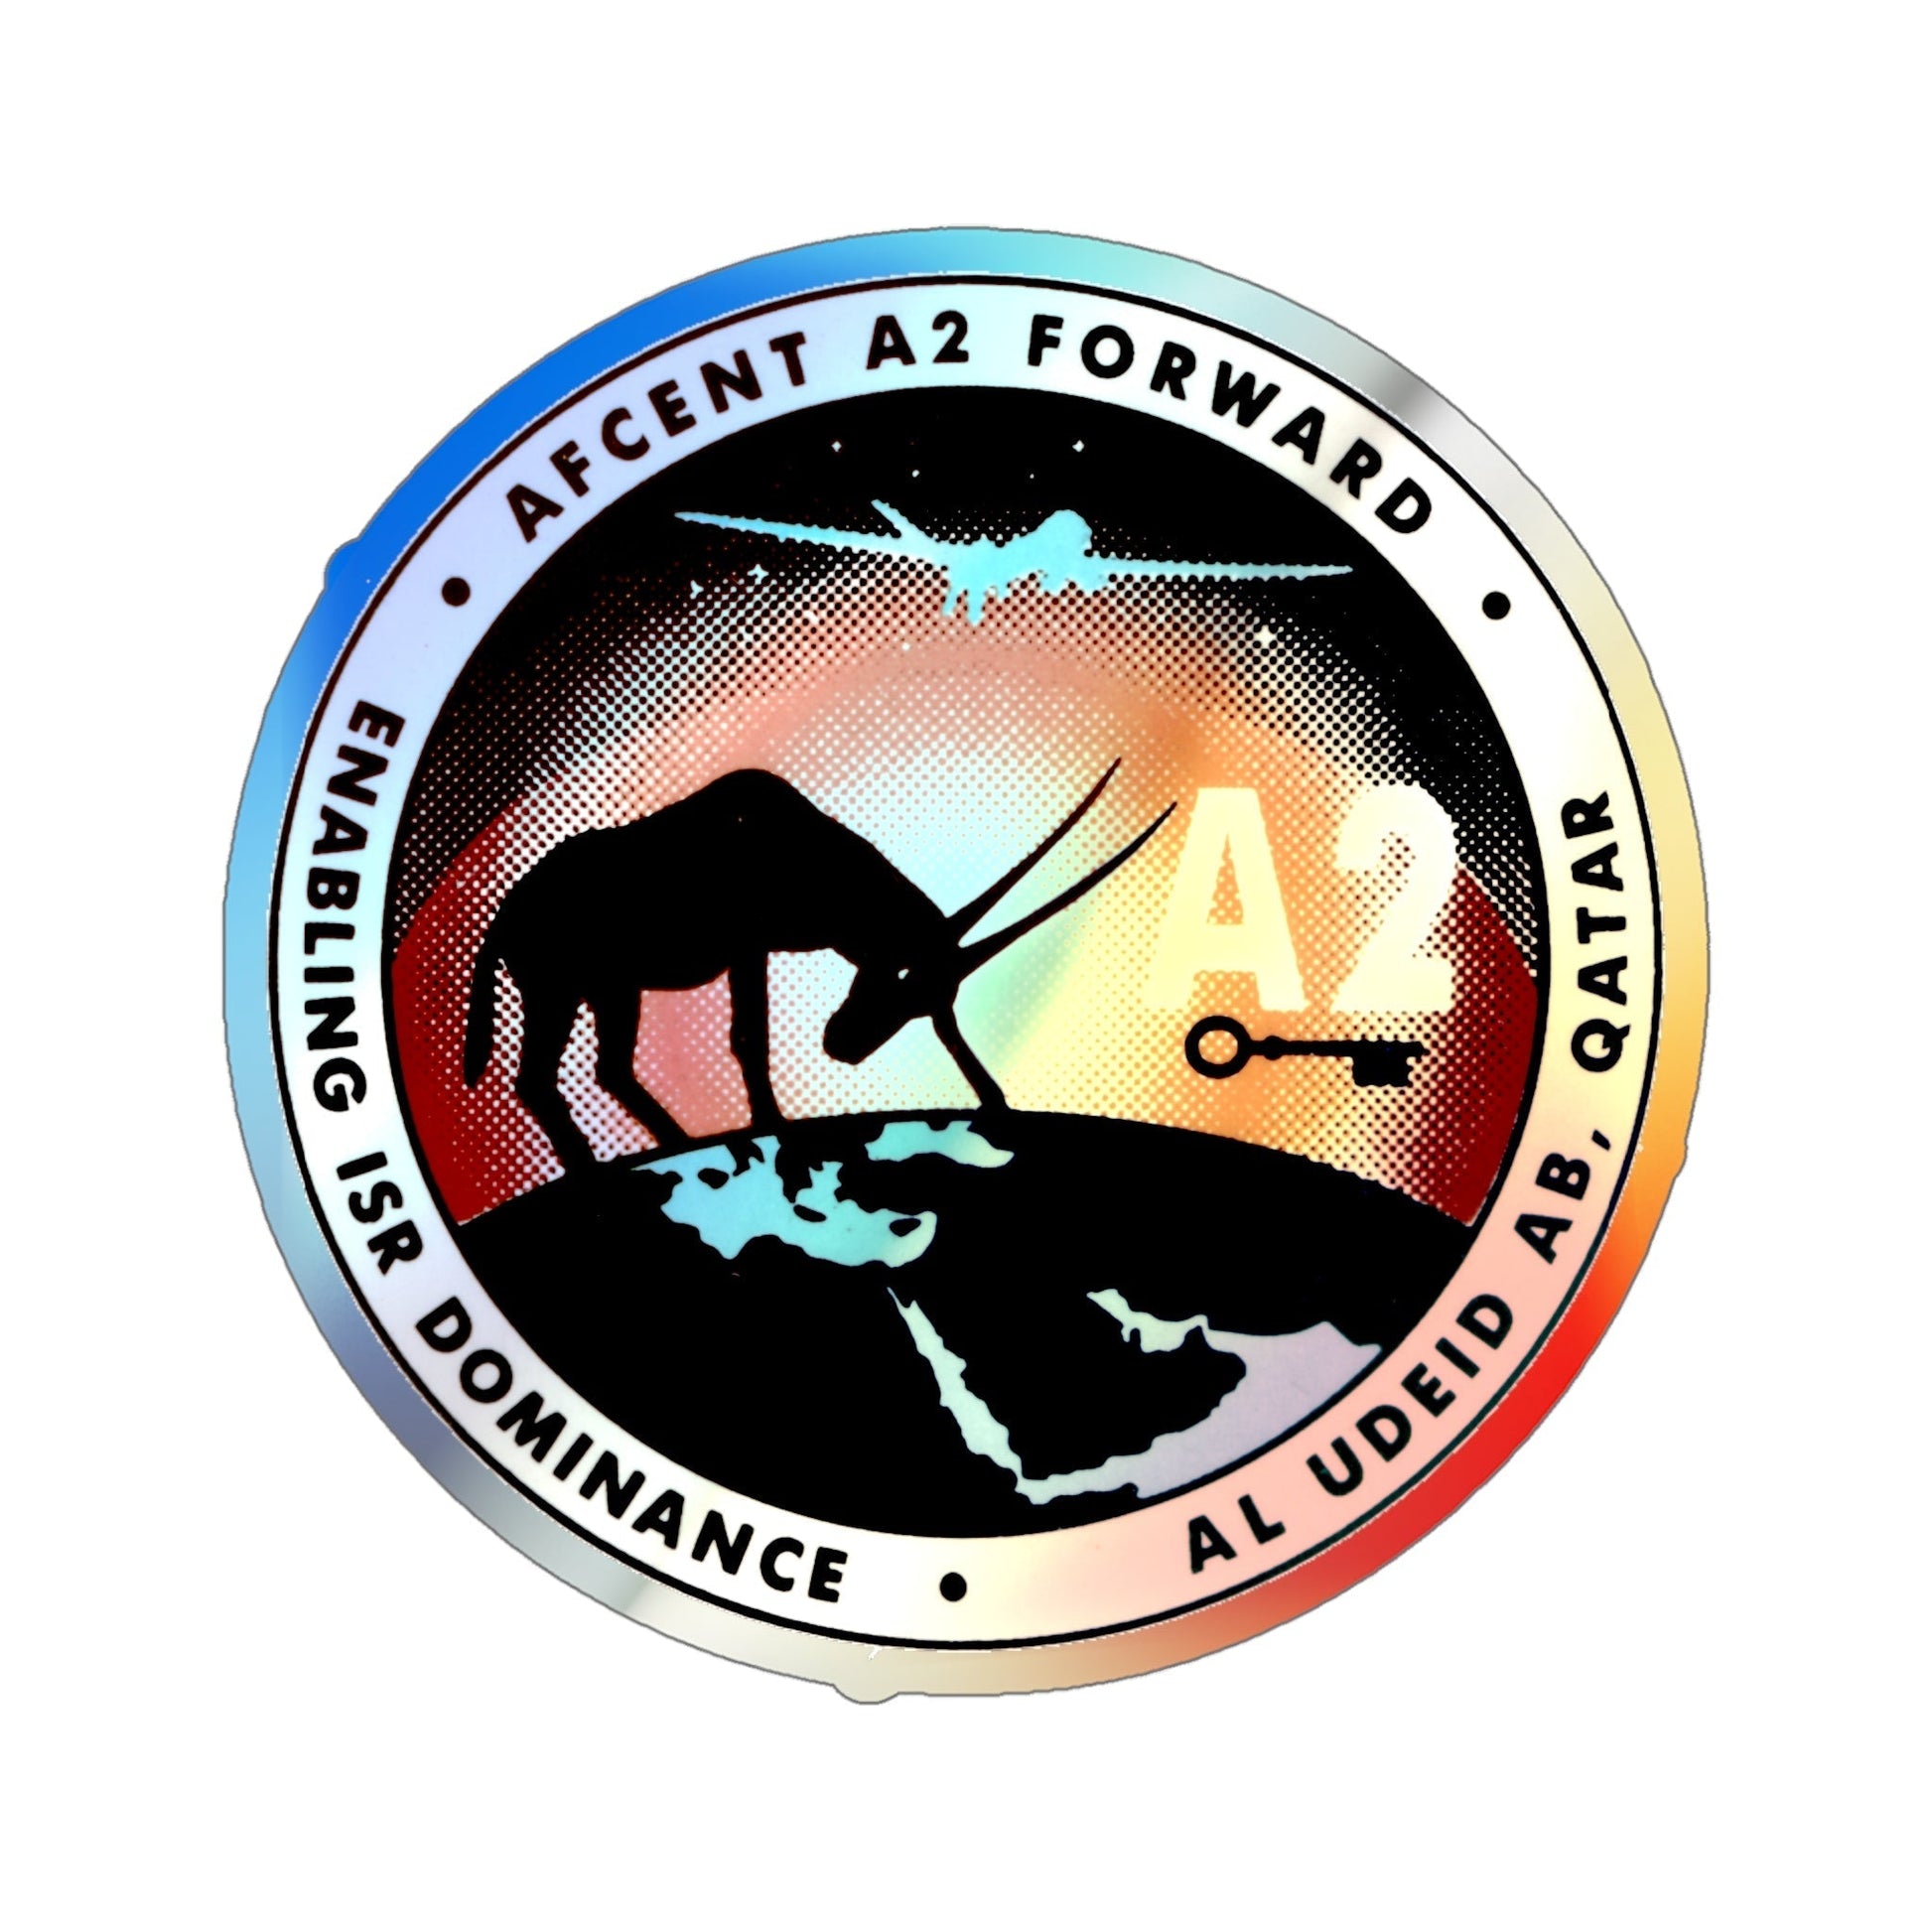 AFCENT A2 Forward (U.S. Air Force) Holographic STICKER Die-Cut Vinyl Decal-5 Inch-The Sticker Space